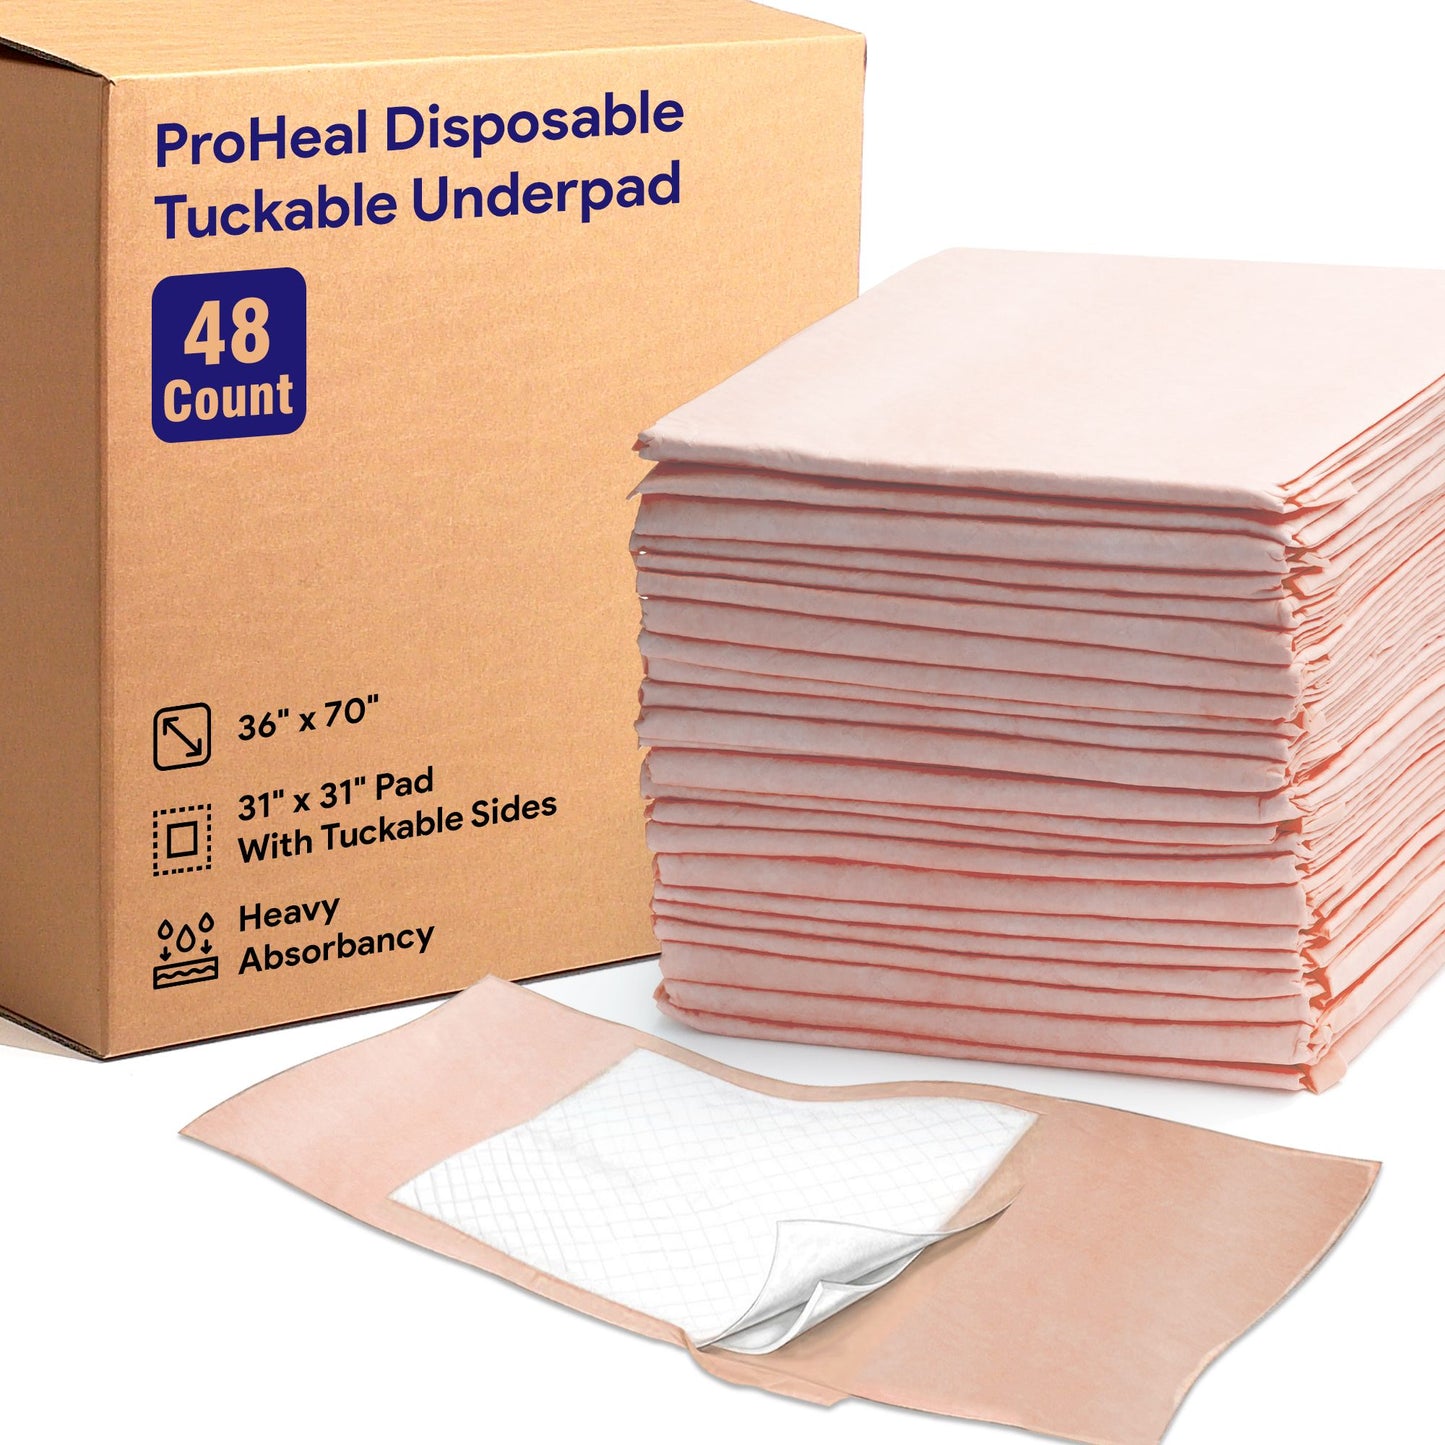 Disposable Incontinence Bed Pads 36"x70", 31"x31" Pad and Tuckable Poly Sides